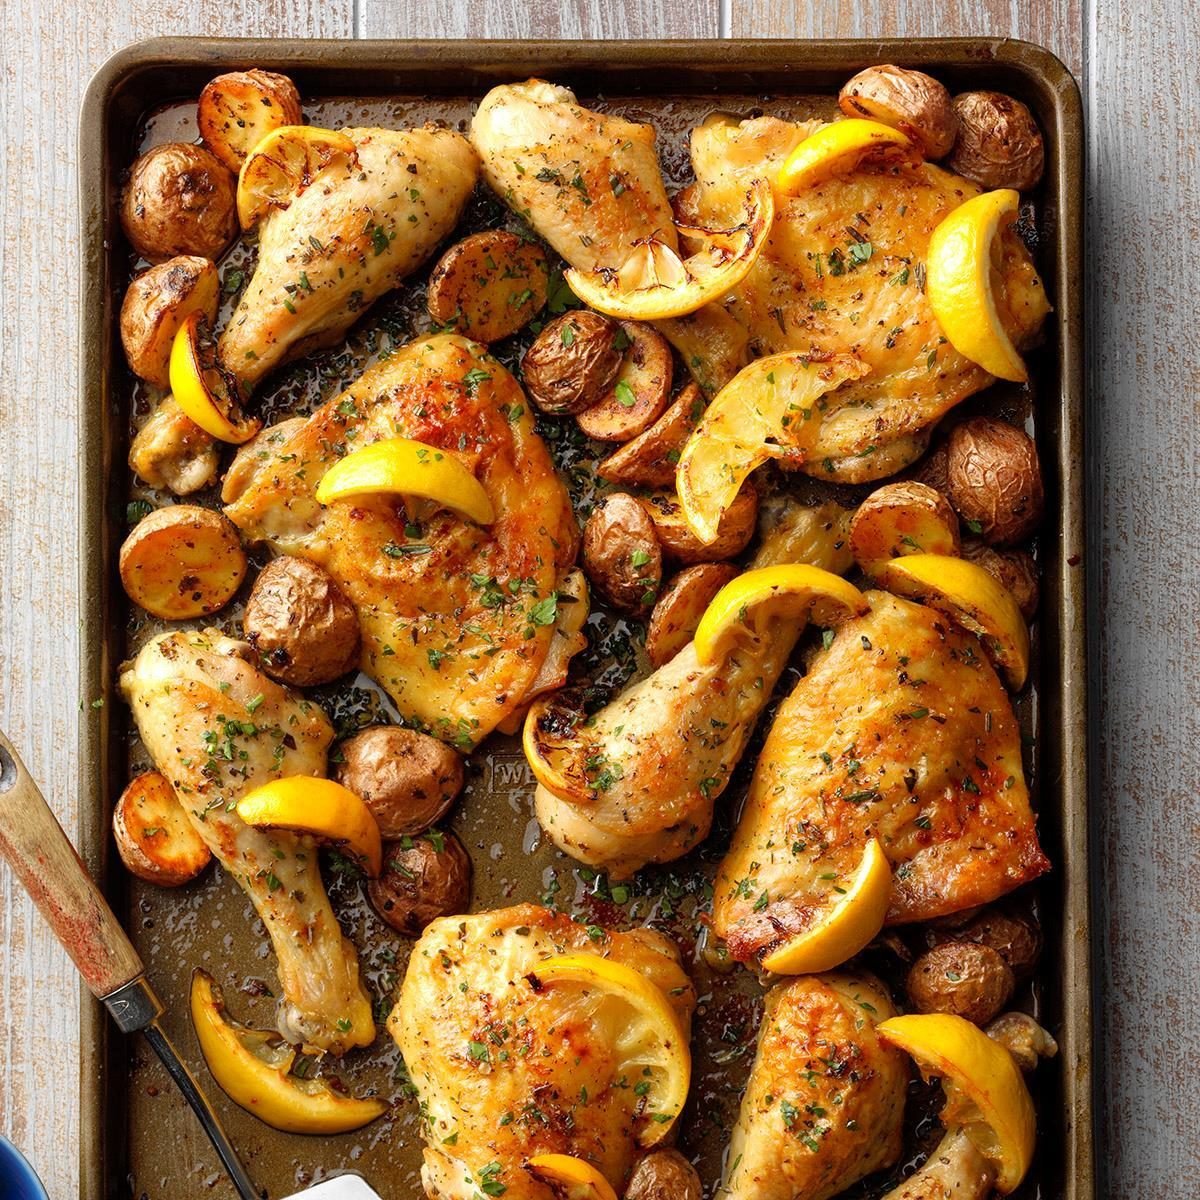 25 Best Sheet Pan Dinner Recipes - How to Make One-Pan Meals